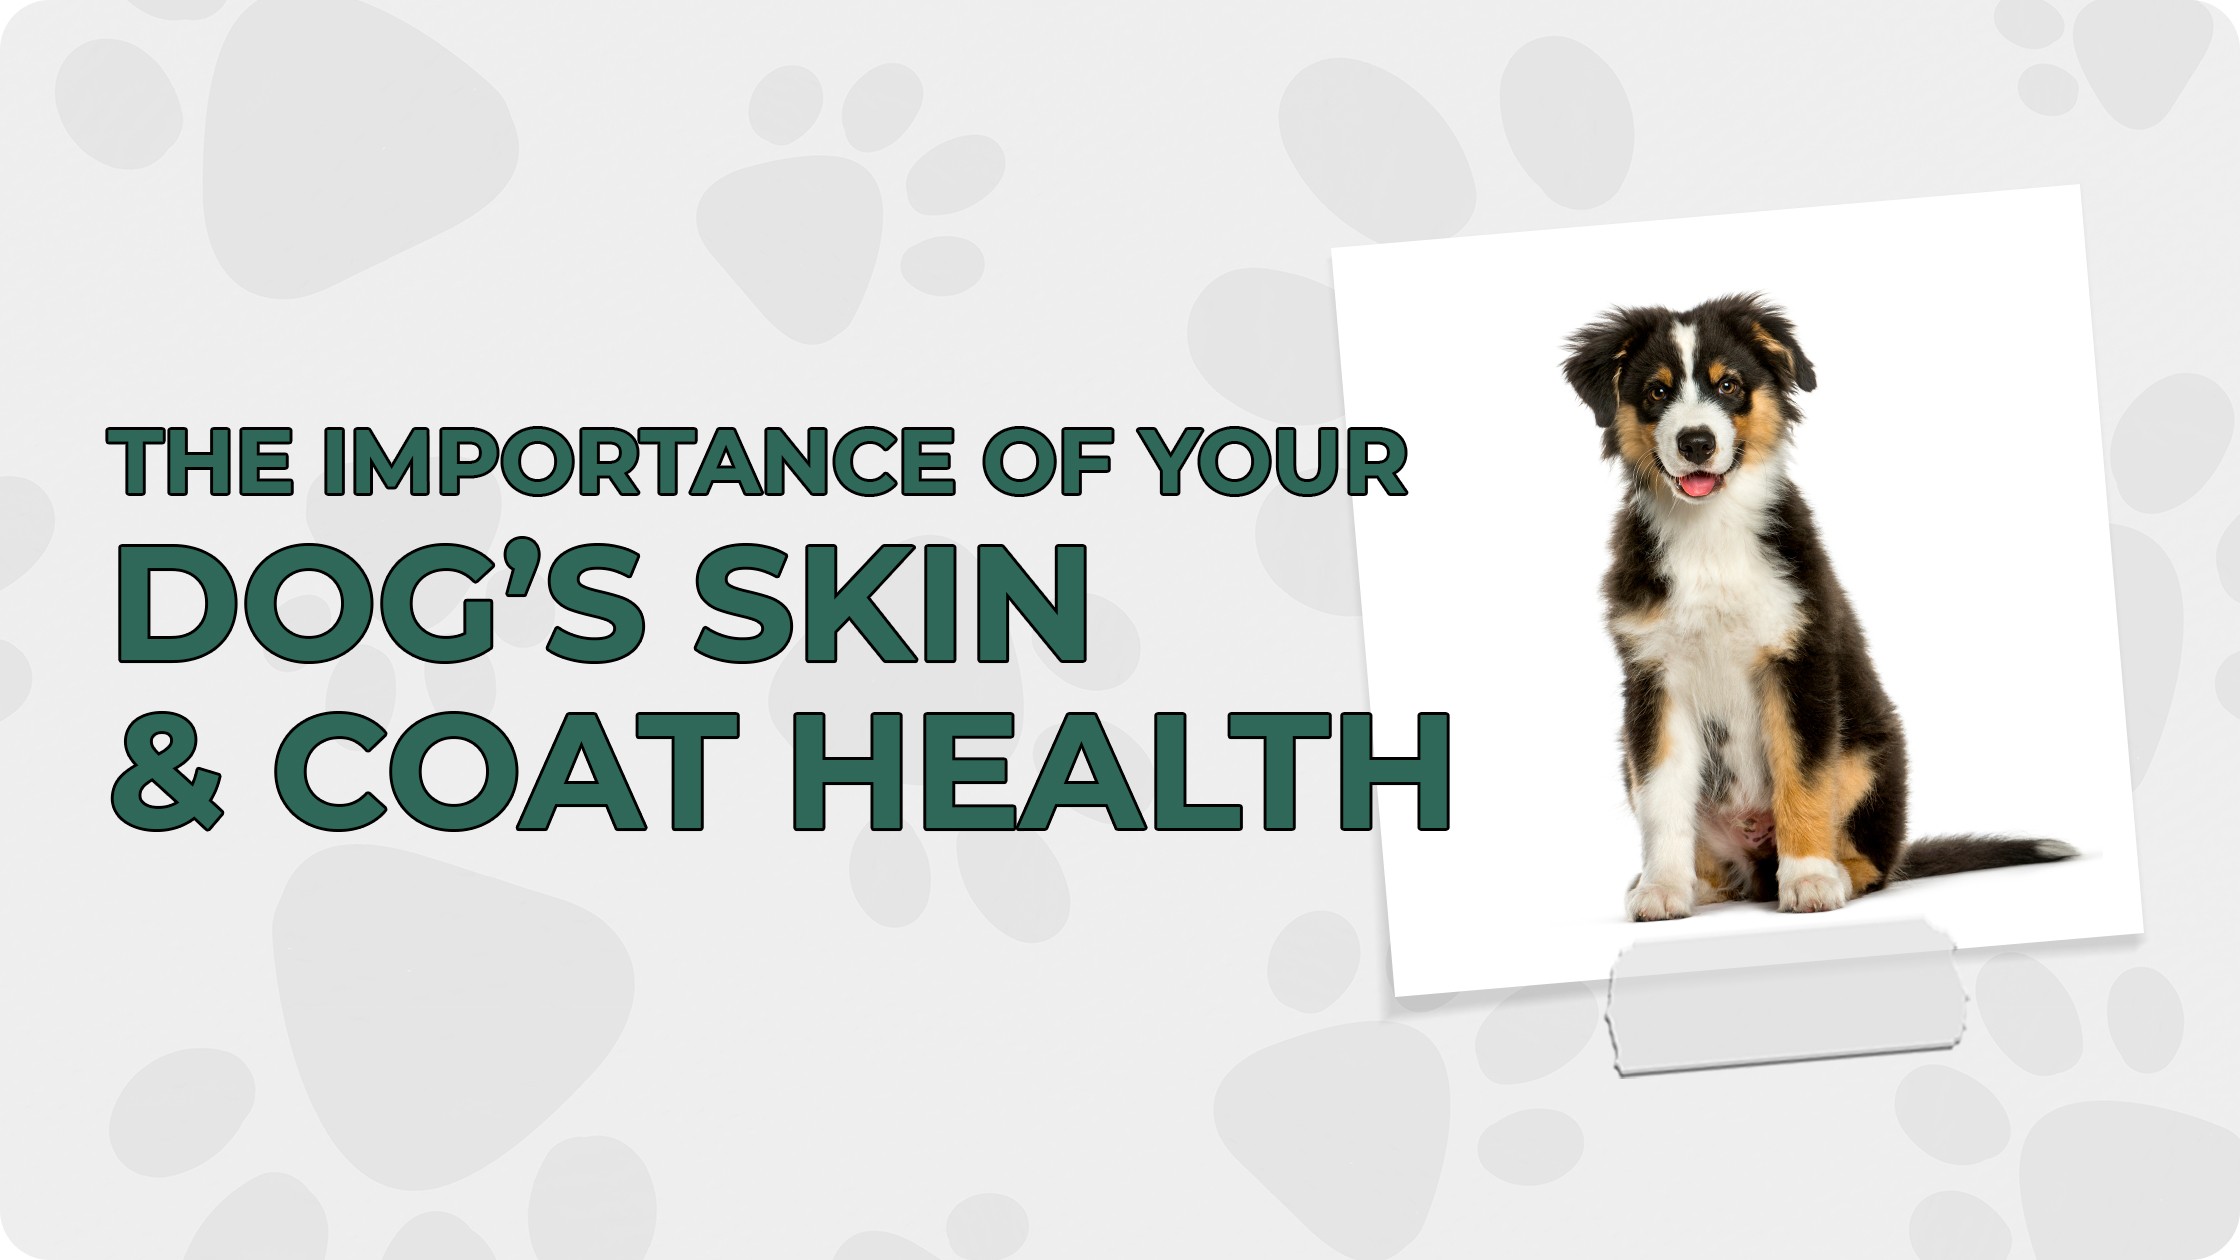 How To Keep Your Dog’s Skin & Coat Healthy